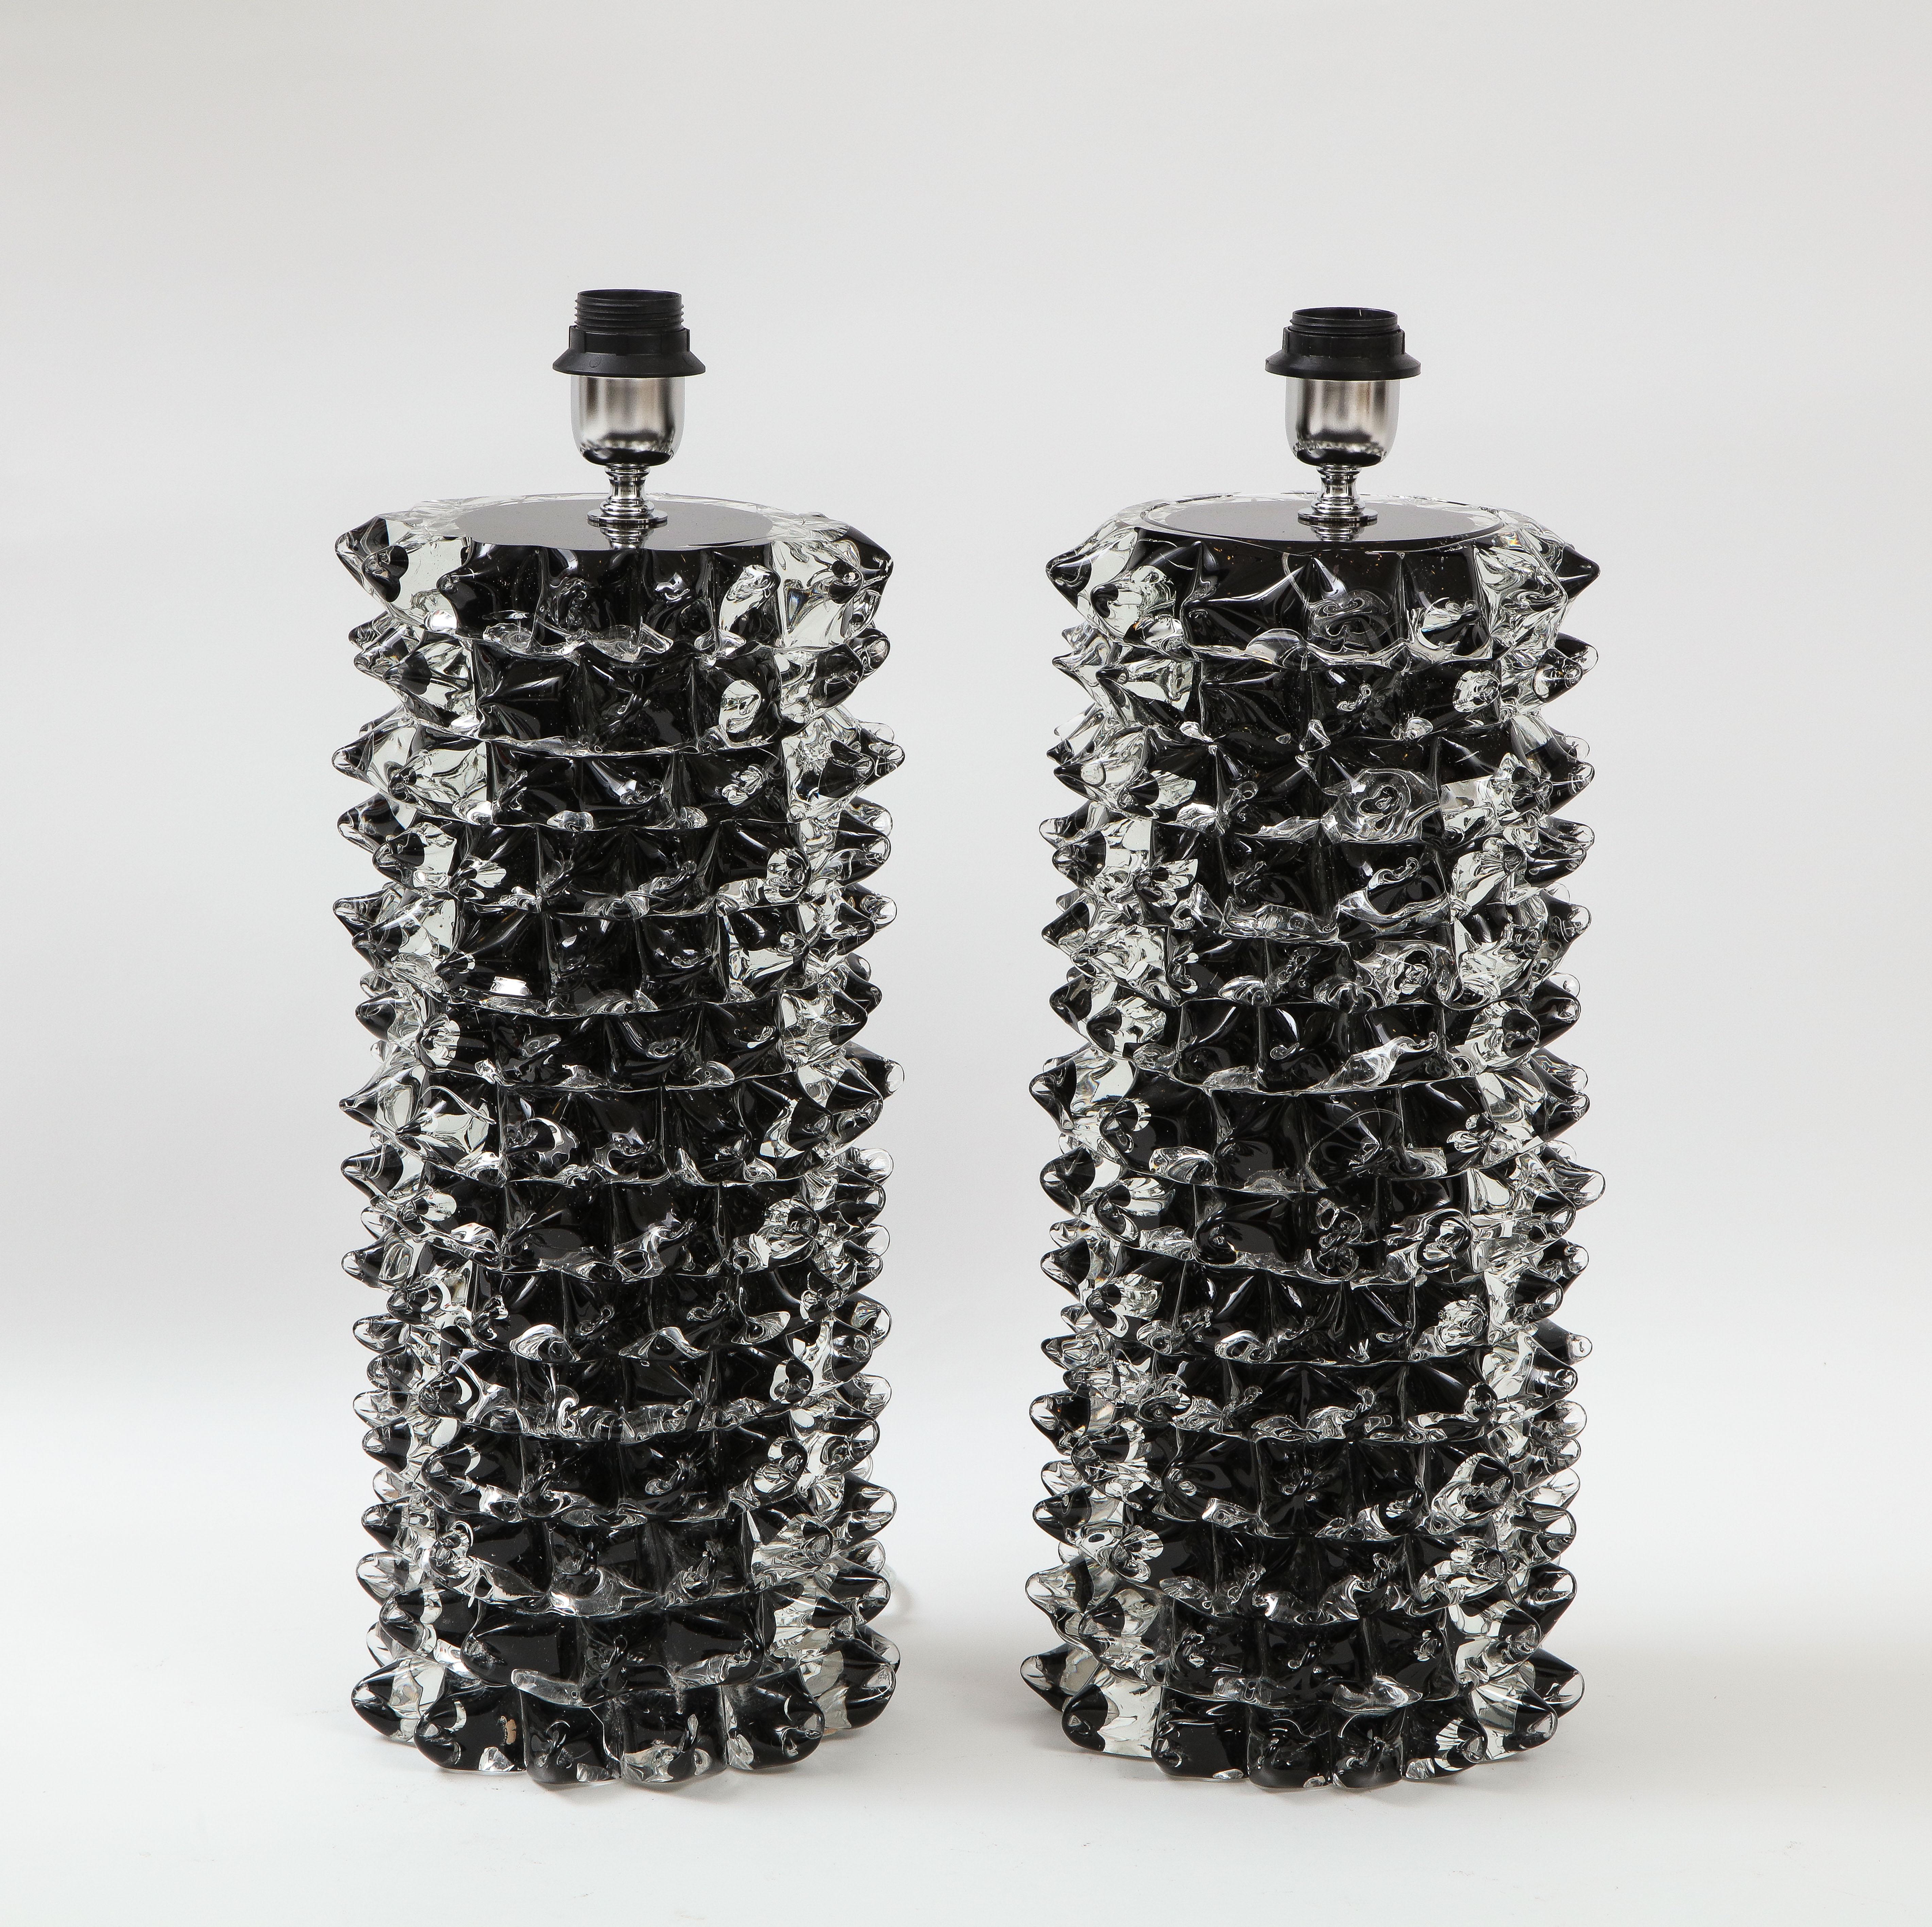 Dramatic Handblown pair of clear and black Murano glass lamps in the iconic manner of the 